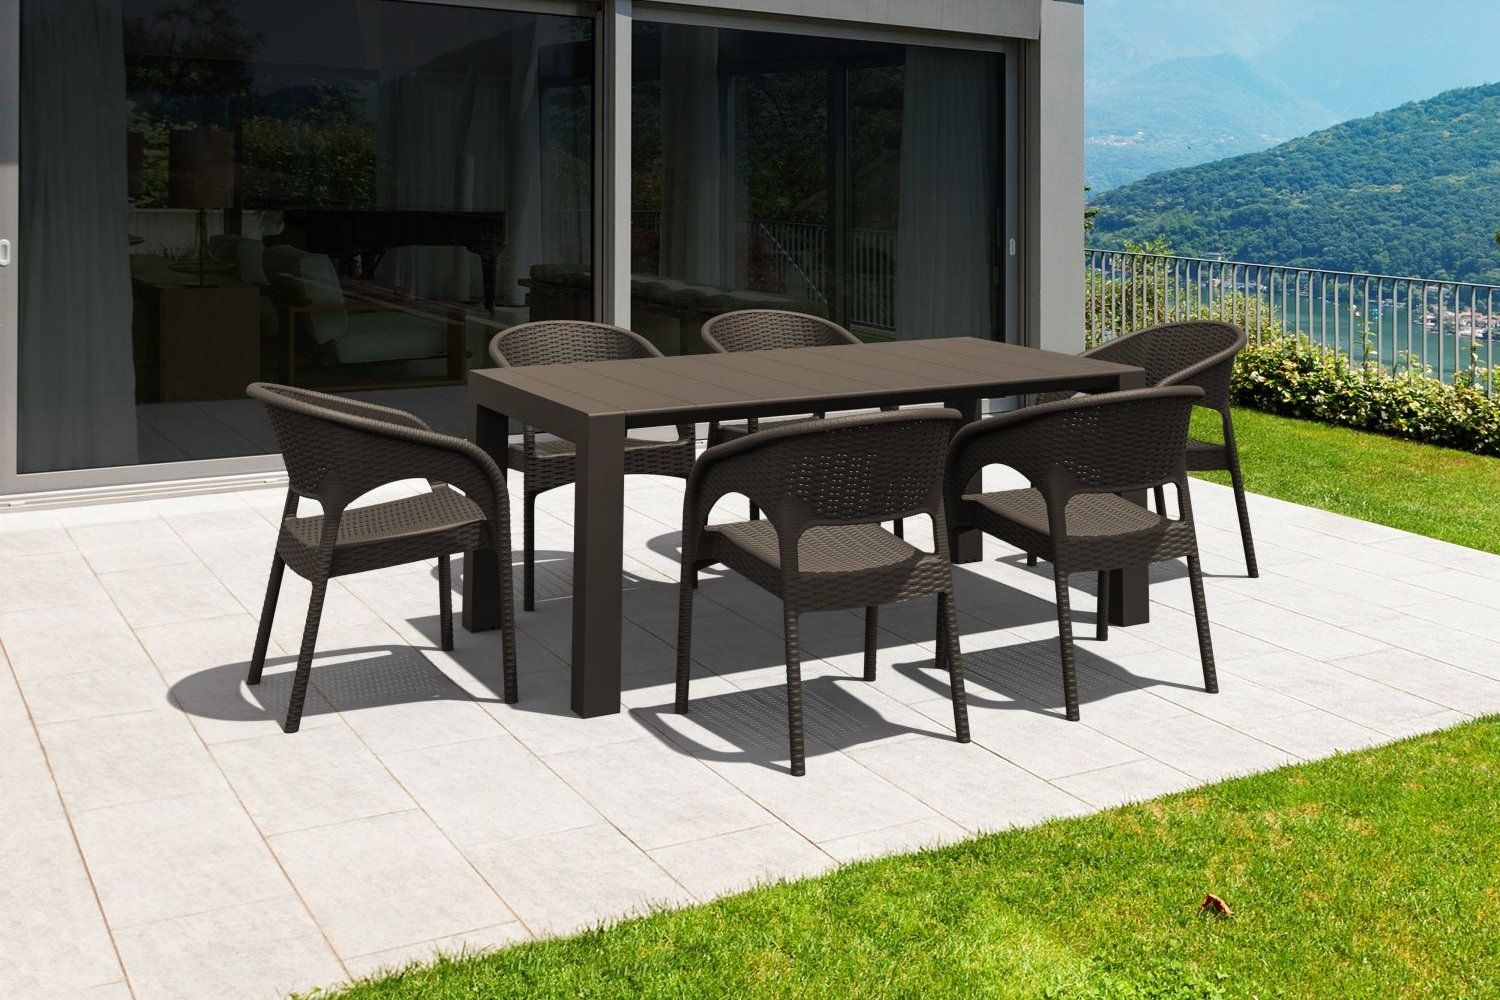 Panama Extendable Patio Dining Set 7 Piece White Isp8082S Whsiesta Intended For Extendable Patio Dining Set (View 7 of 15)